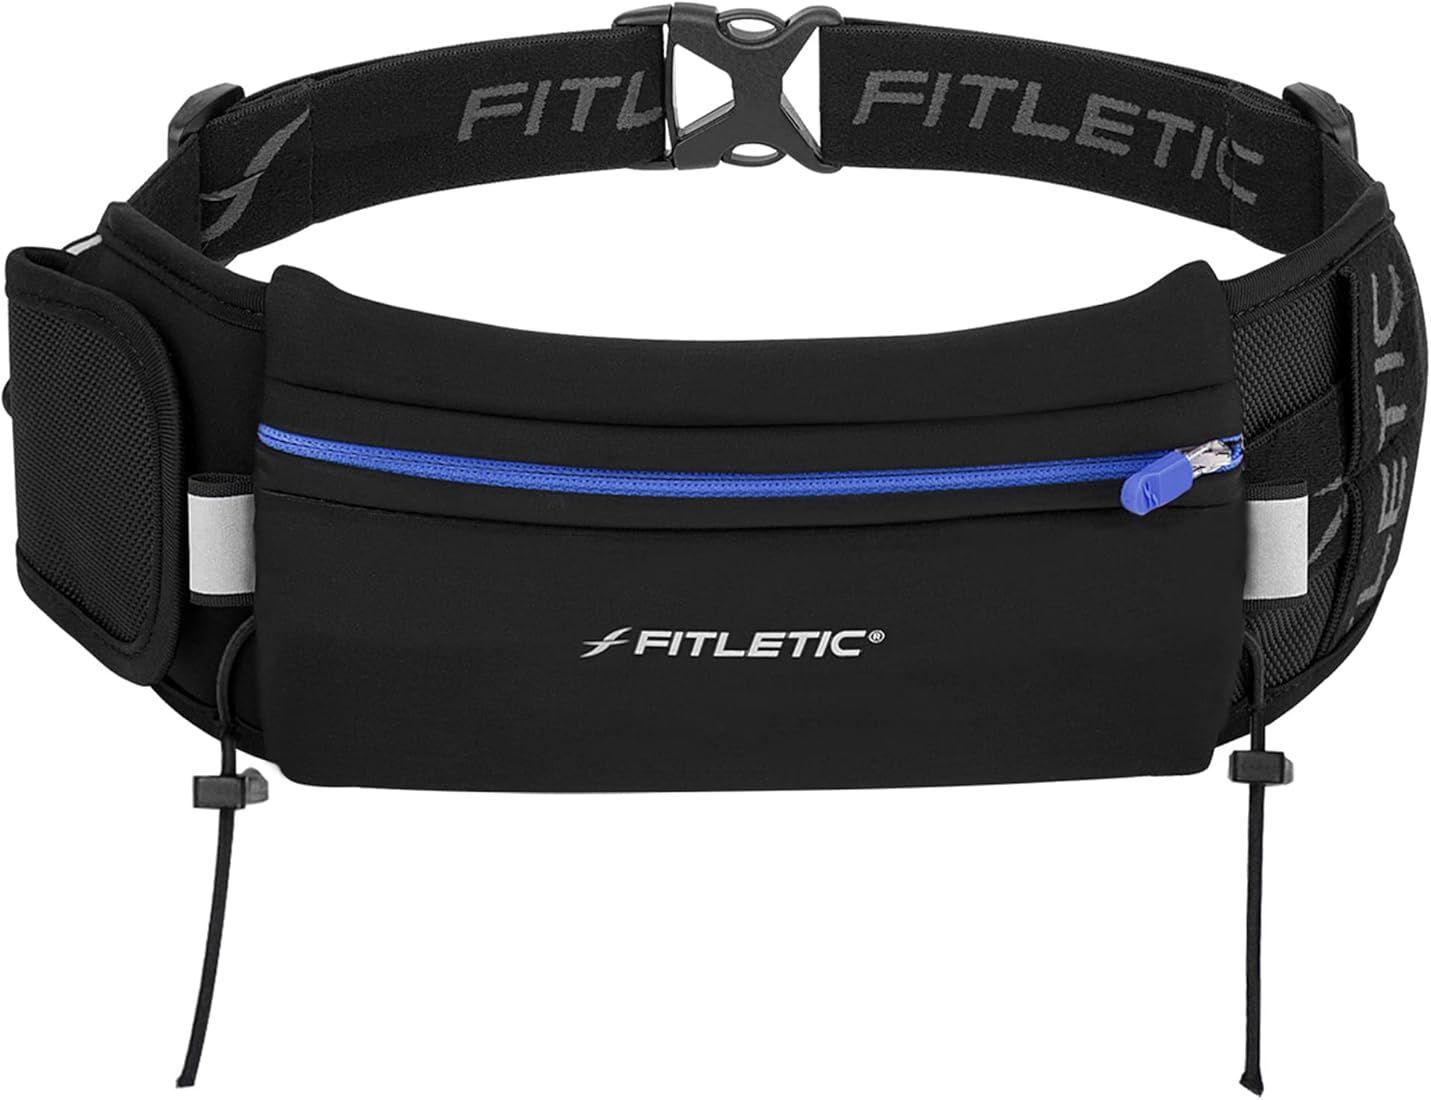 Fitletic Running Belt with Side Pocket, Loops for Energy Gels, Race Bib Number Holder. Waist Pack Wa | Amazon (US)